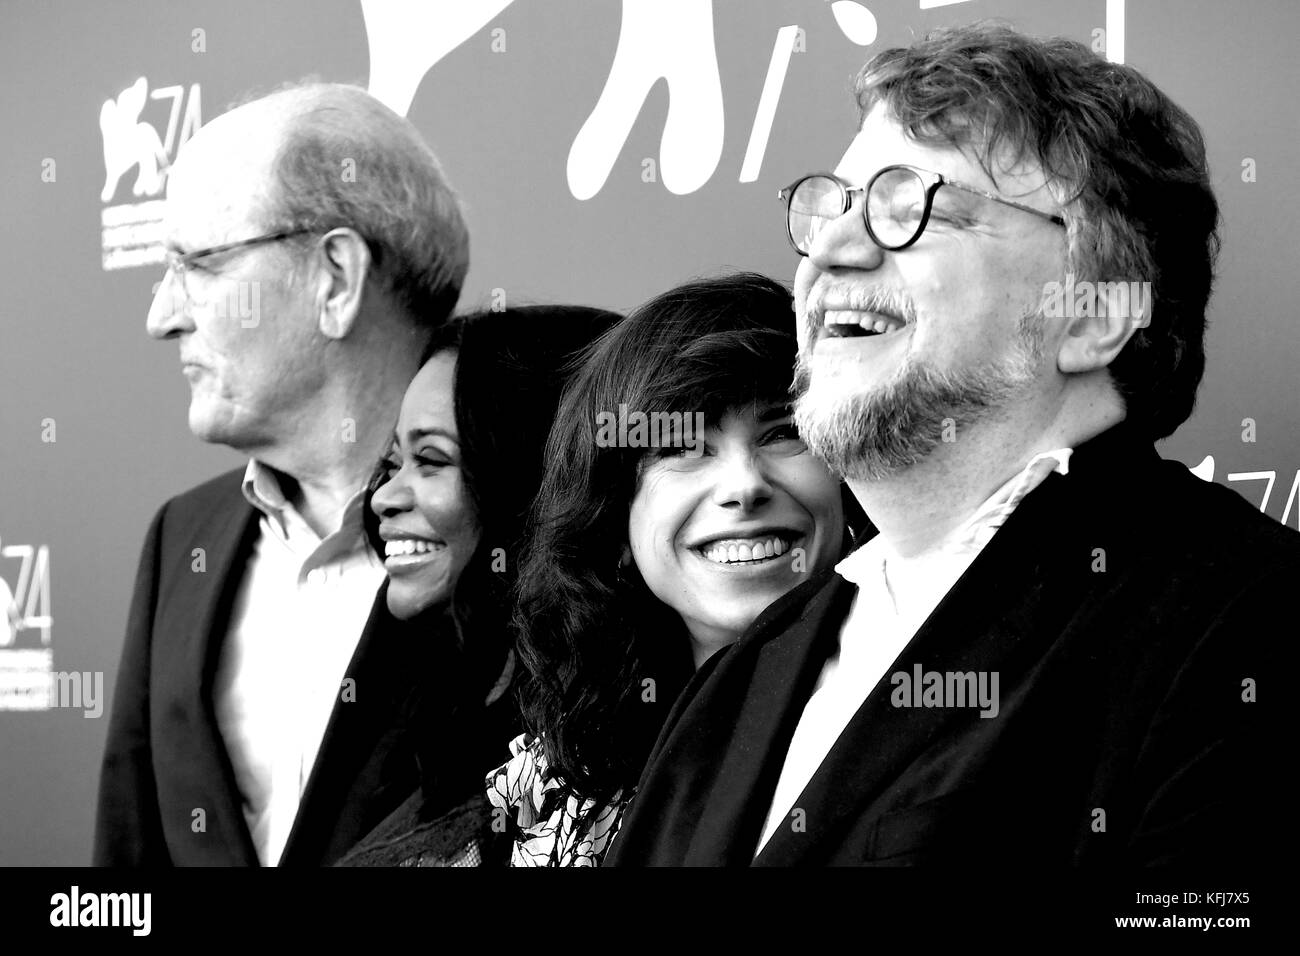 Richard Jenkins, Octavia Spencer, Sally Hawkins and Guillermo del Toro attend a photocall for The Shape Of Water, Venice Film Festival © Paul Treadway Stock Photo